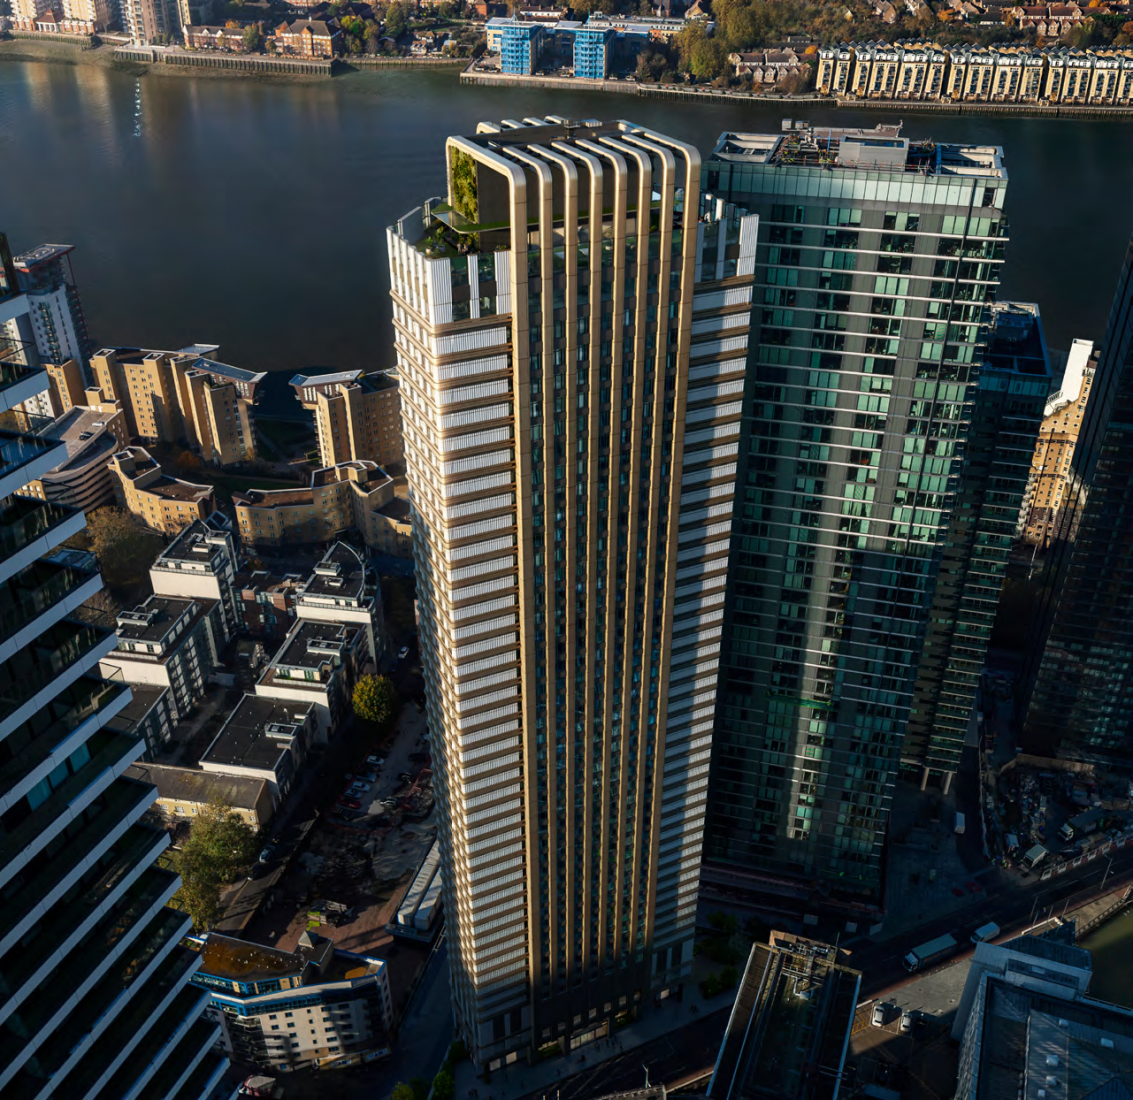 Tower Hamlets Approved Plans for a 48-storey block on Isle of Dogs